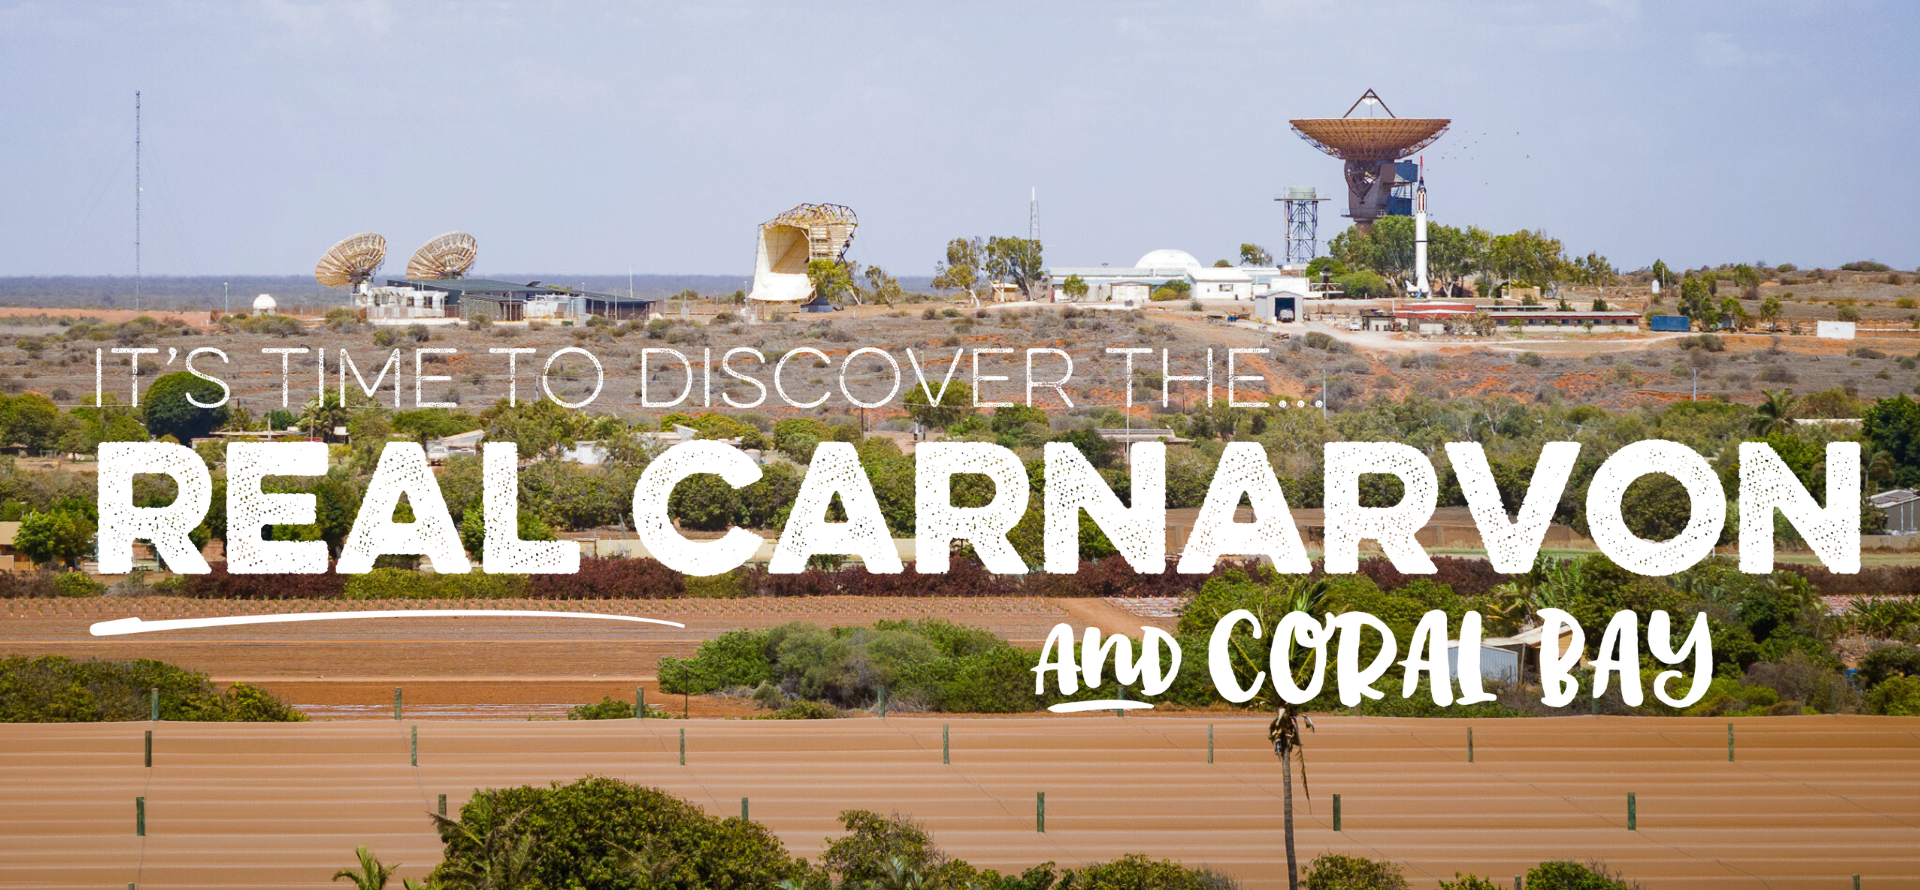 The New Carnarvon Visitors Centre Website is Now Live